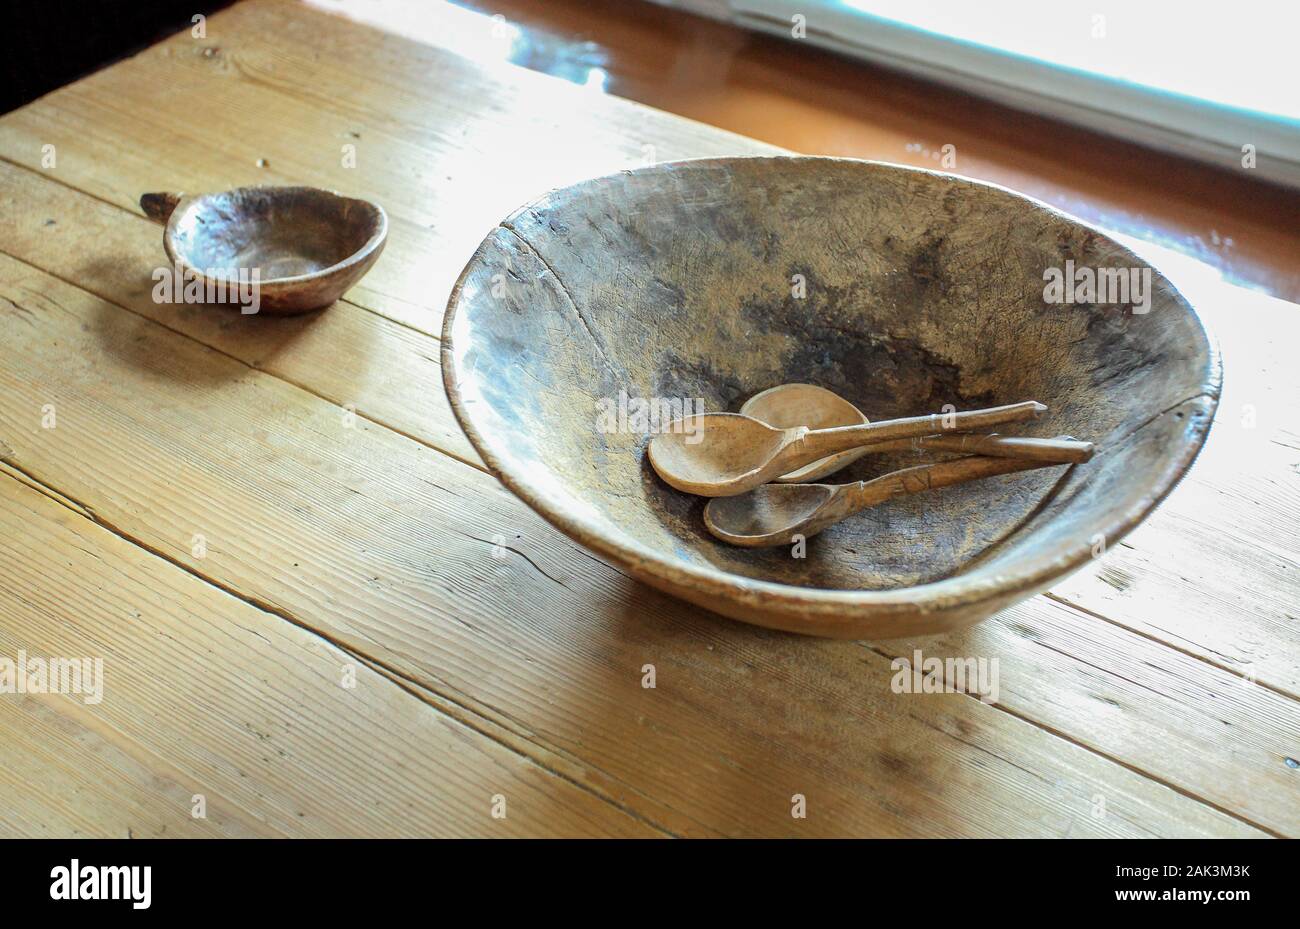 Old Russian wooden dishes on a wooden table Stock Photo